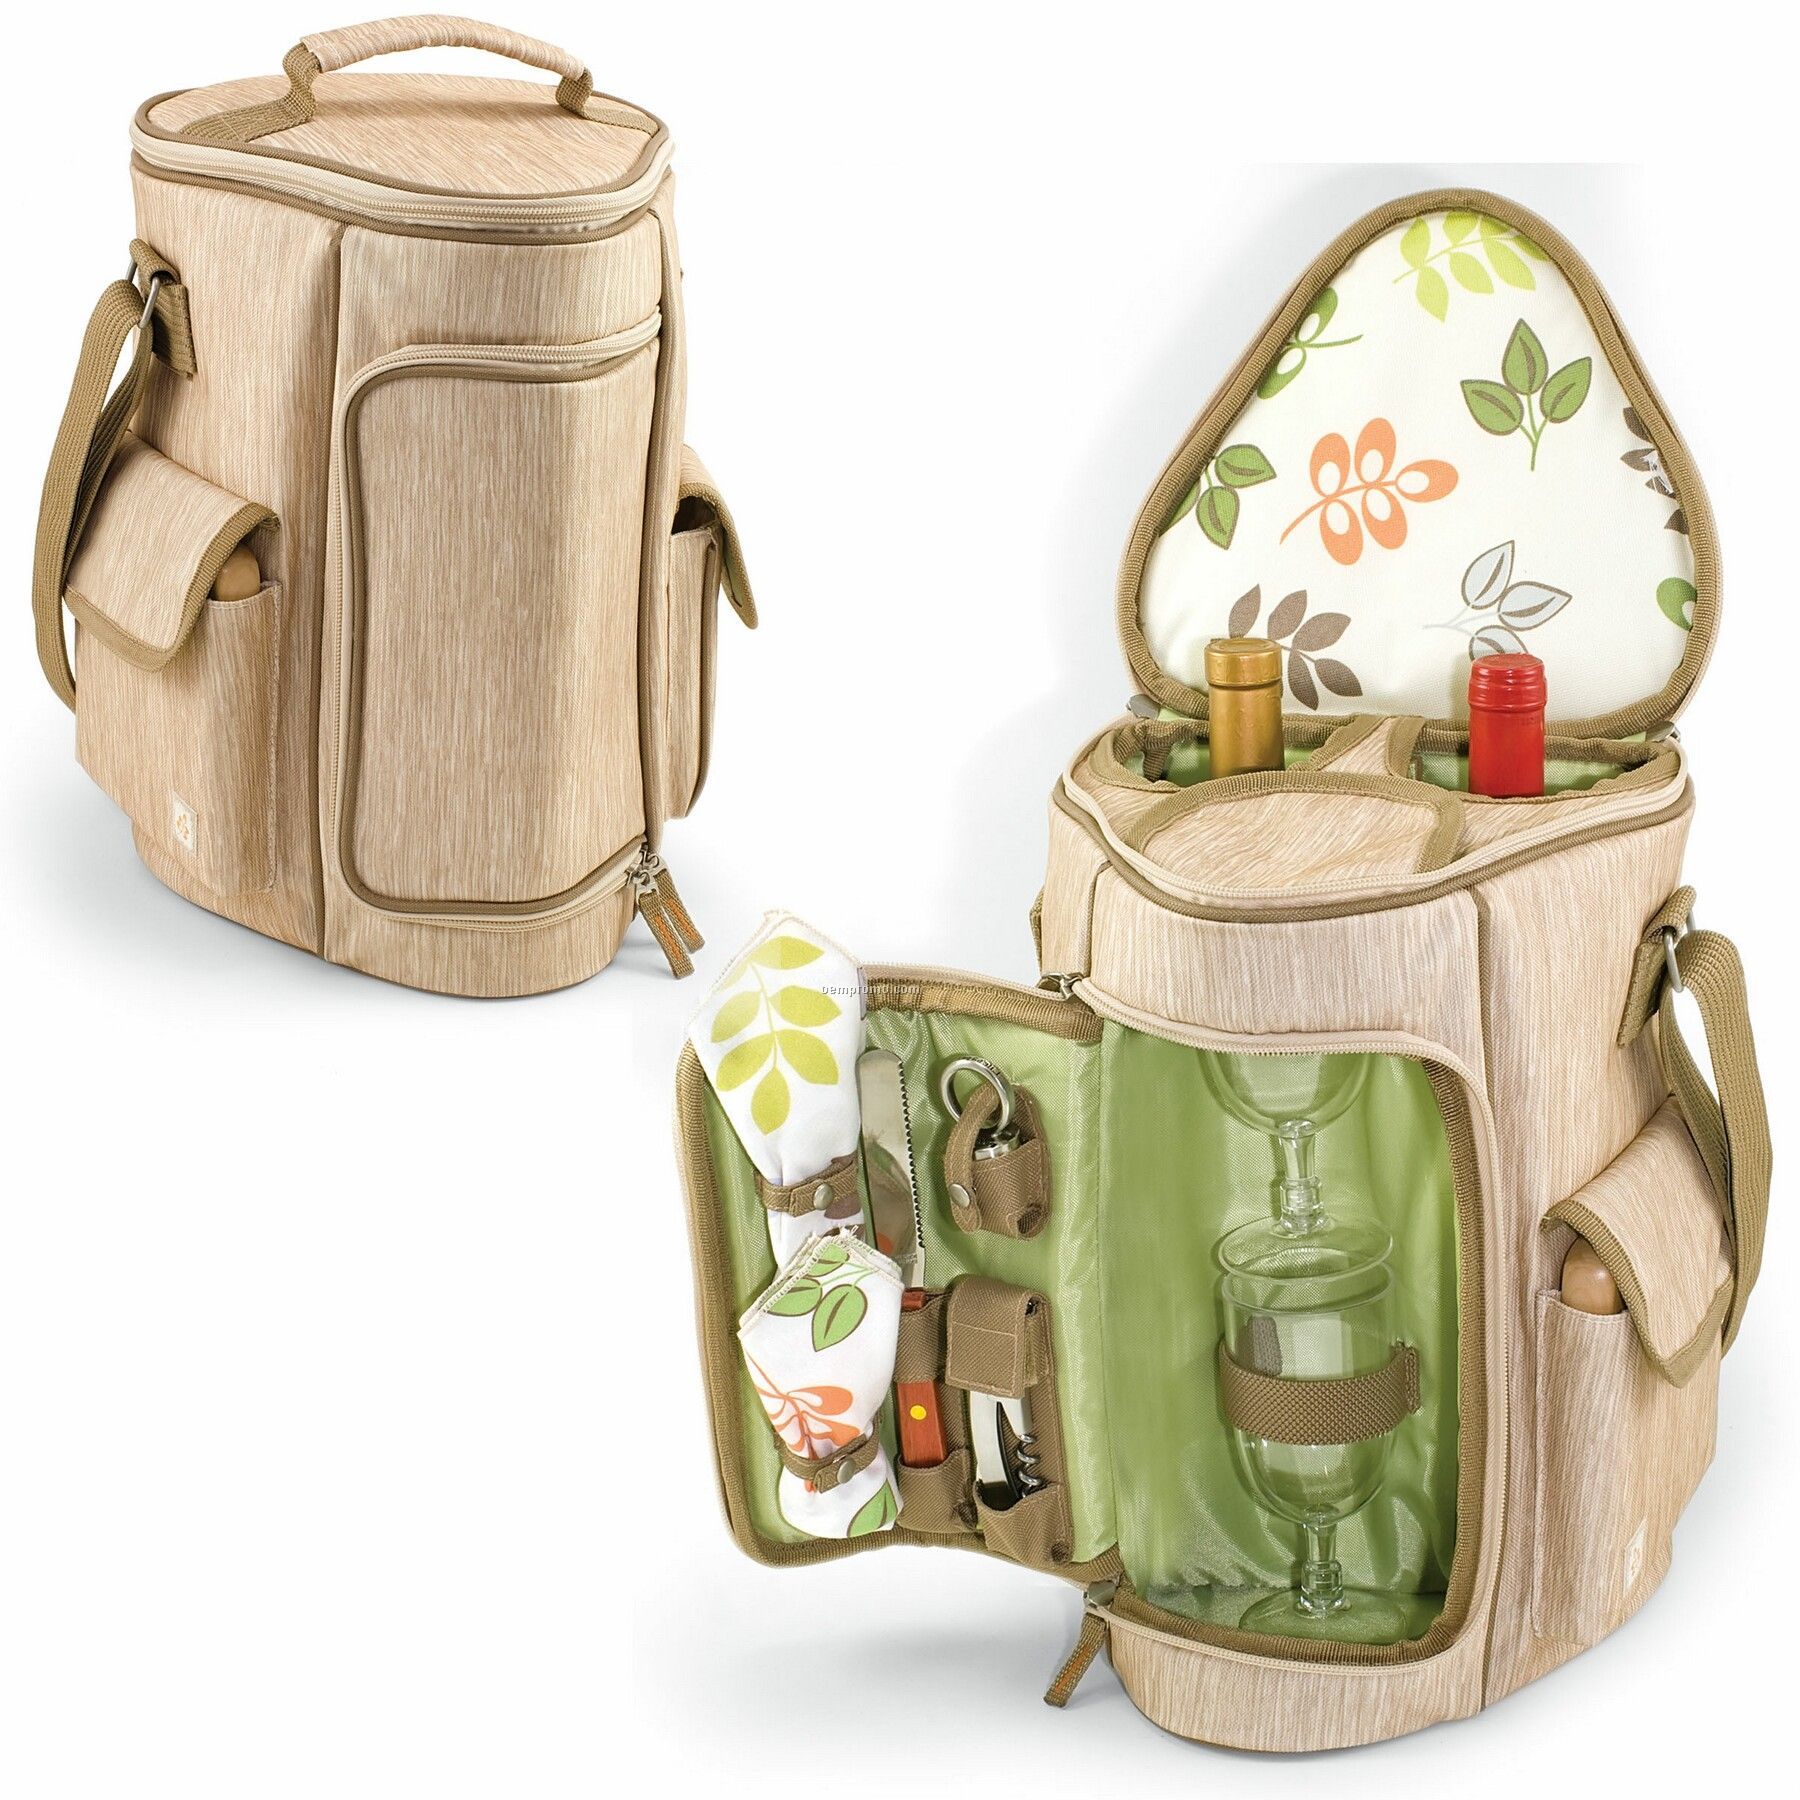 Meritage Botanica Wine & Cheese 2 Bottle Tote Bag - Floral (Svc. For 2)